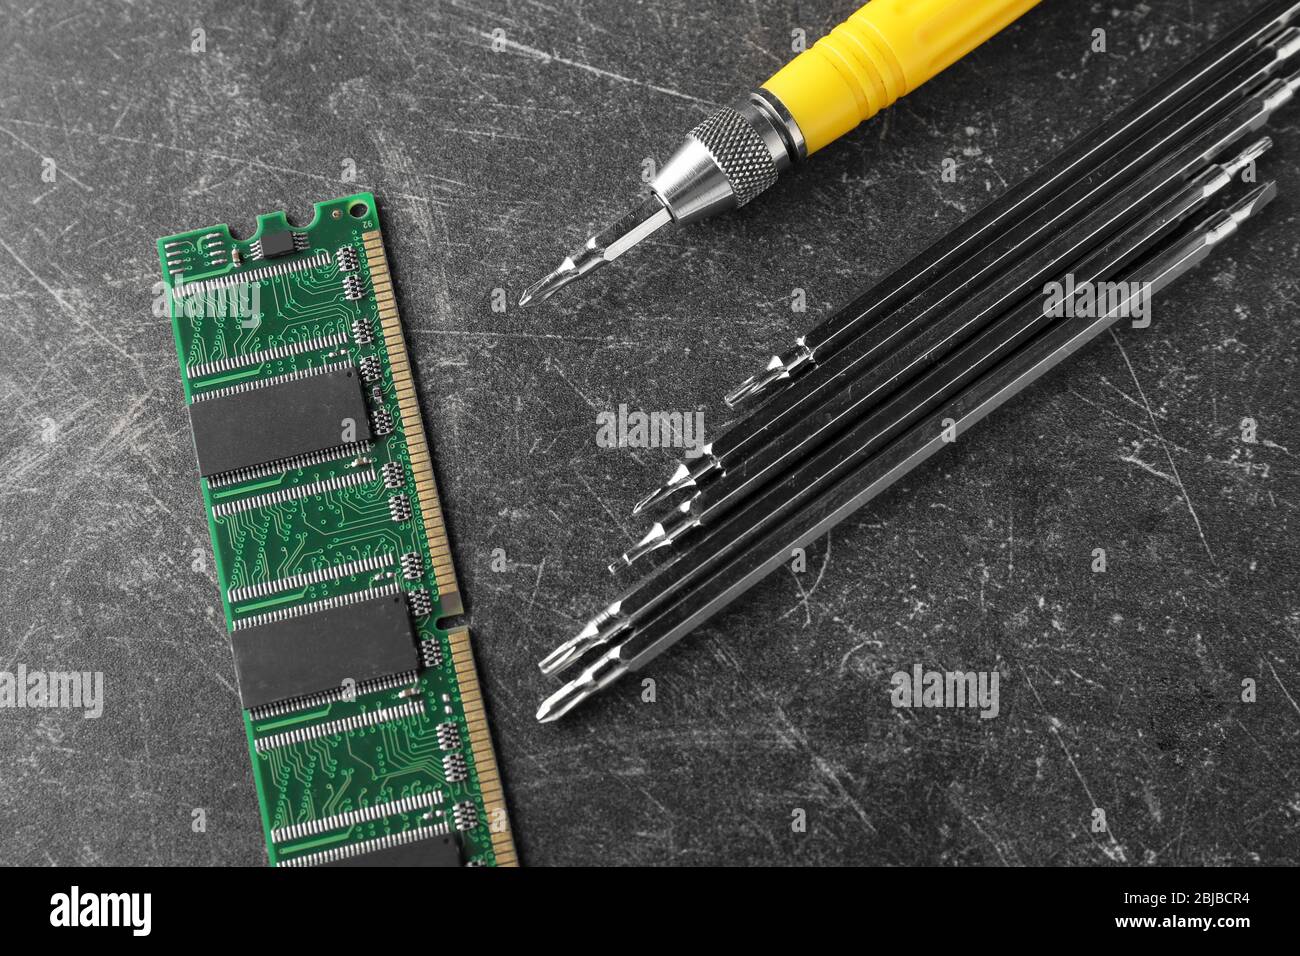 RAM memory, screwdriver and exchangeable bits on grey background Stock Photo